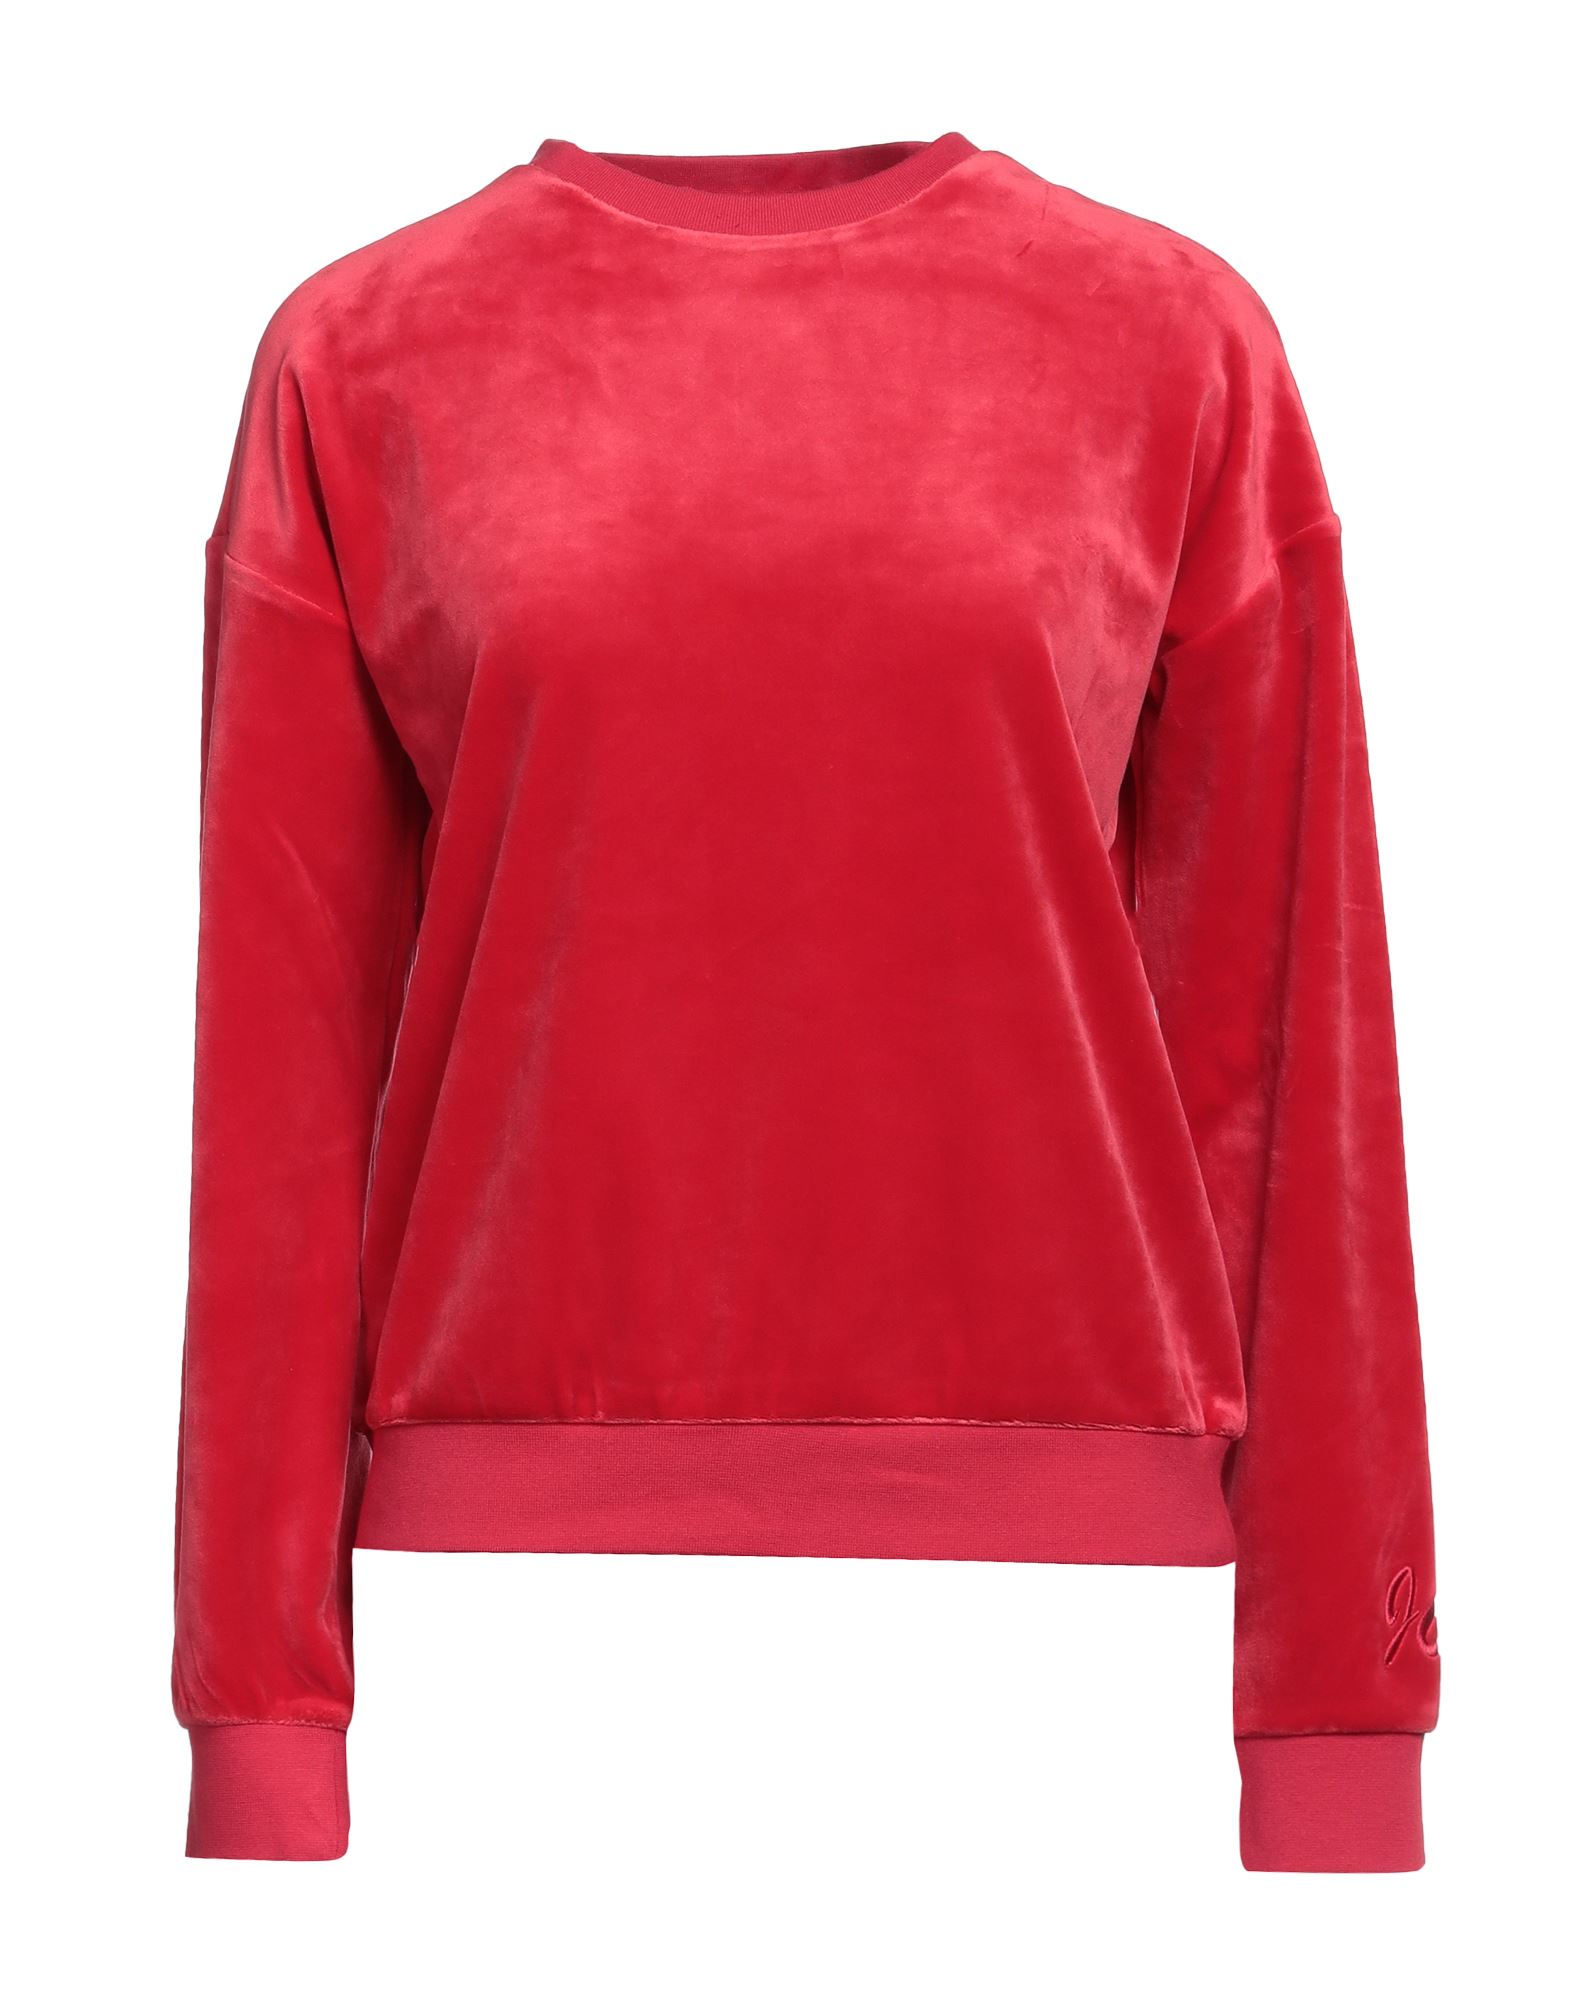 JUICY COUTURE JUICY COUTURE WOMAN SWEATSHIRT RED SIZE L POLYESTER, ELASTANE